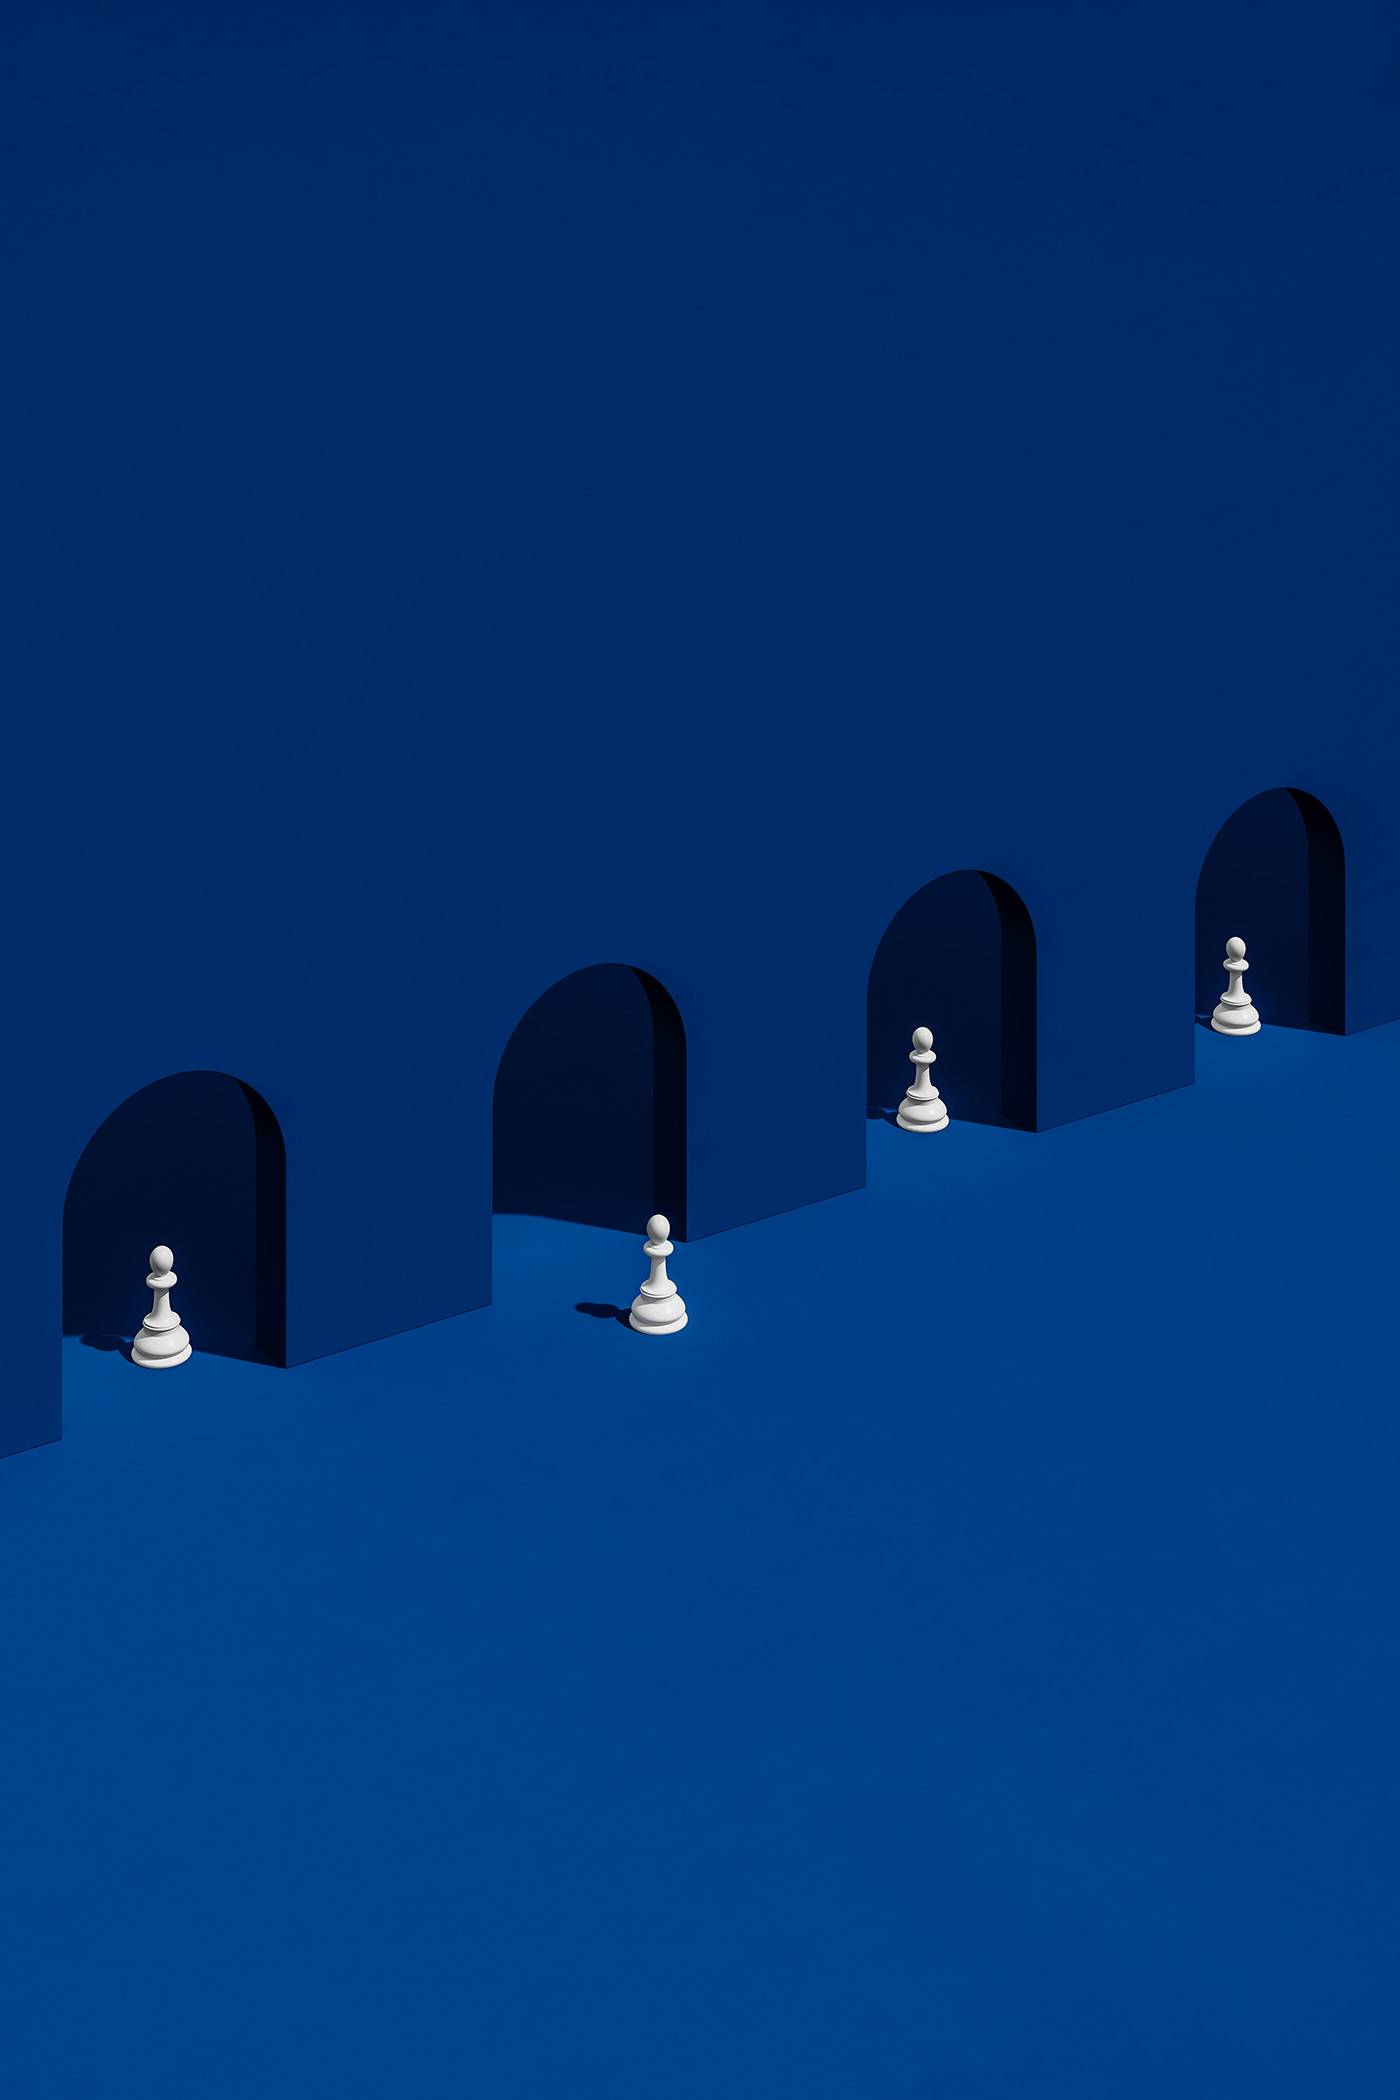 Chess pawns on blue background. Concept